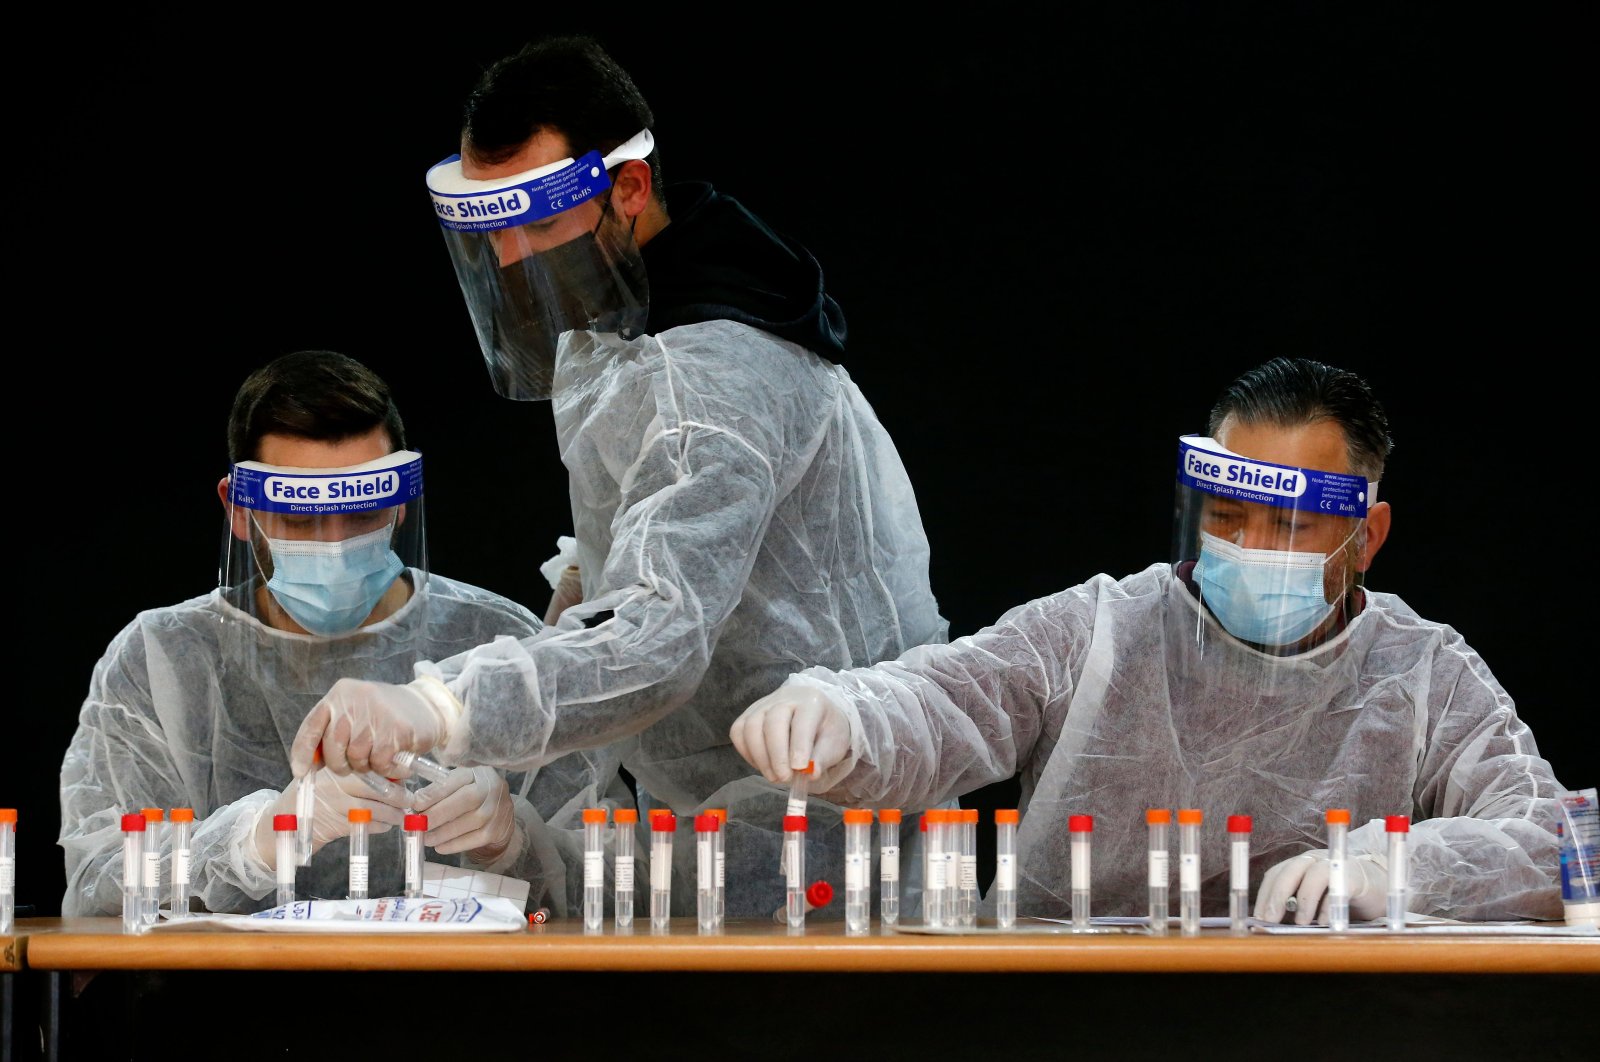 Palestinian health workers register samples for coronavirus testing in the occupied West Bank village of Dura, southwest of Hebron, Jan. 8, 2021. (AFP Photo)